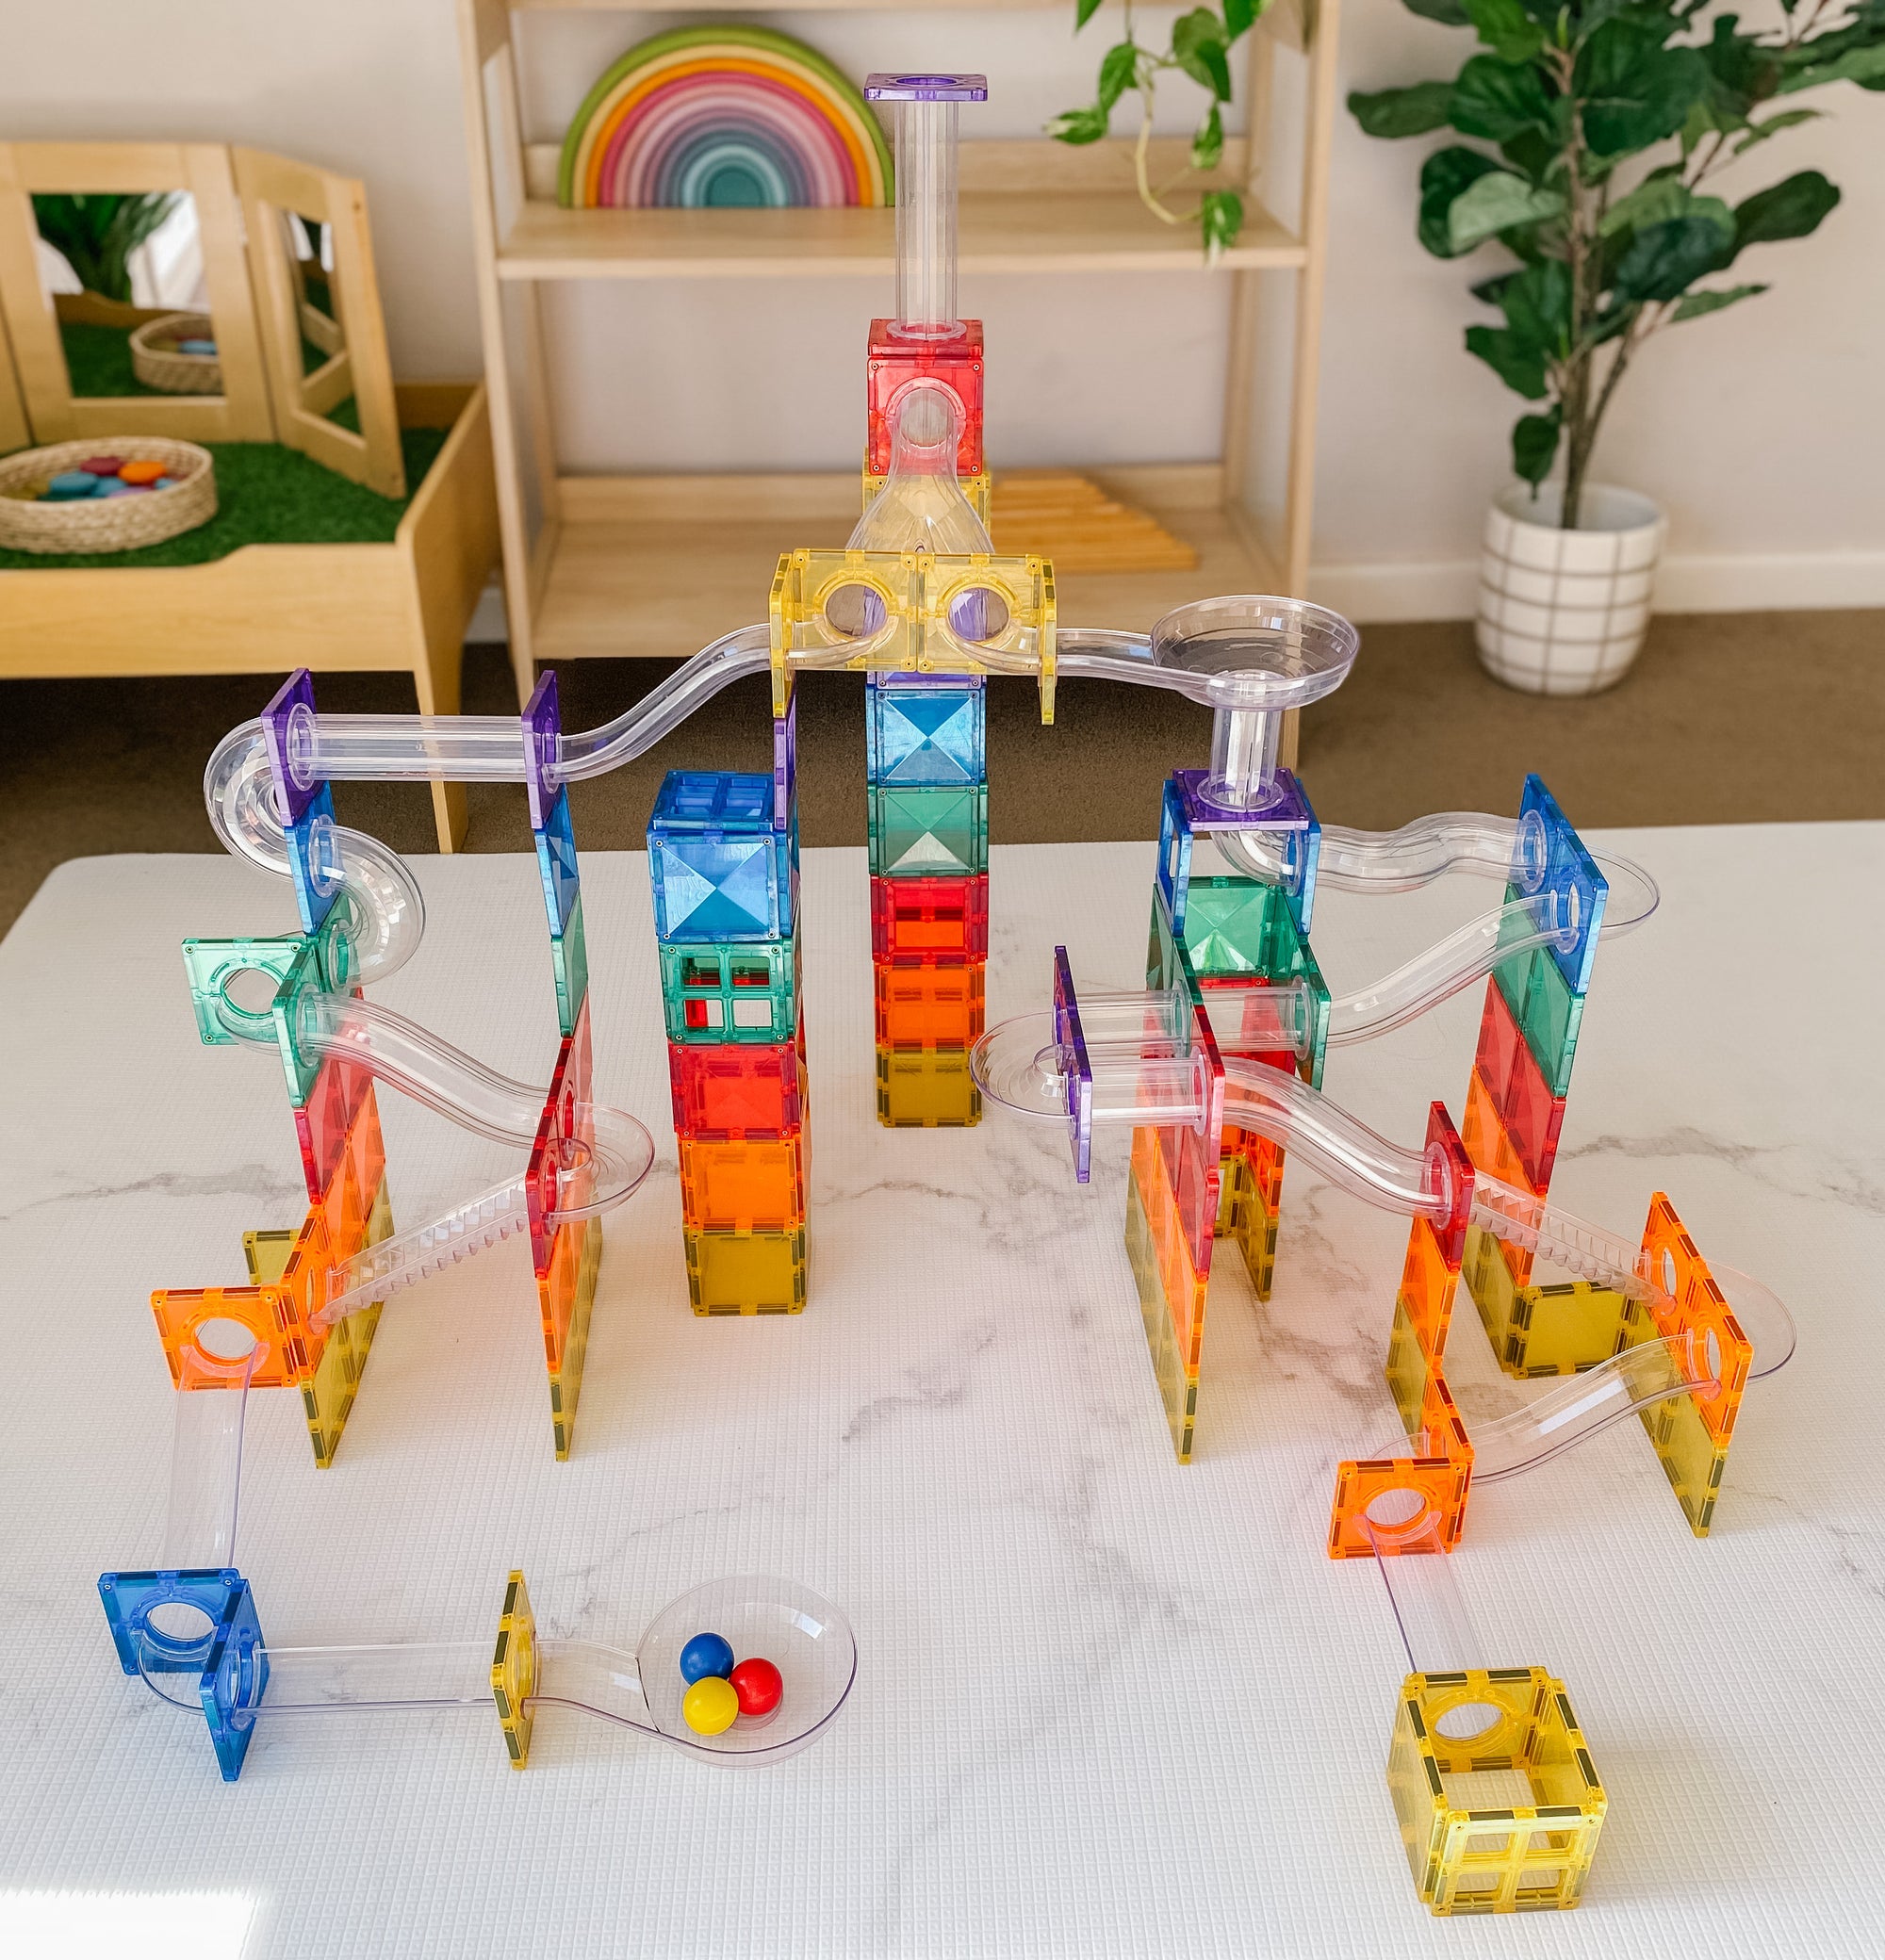 Learn and Grow vs Connetix Magnetic Marble Runs - how do they compare?